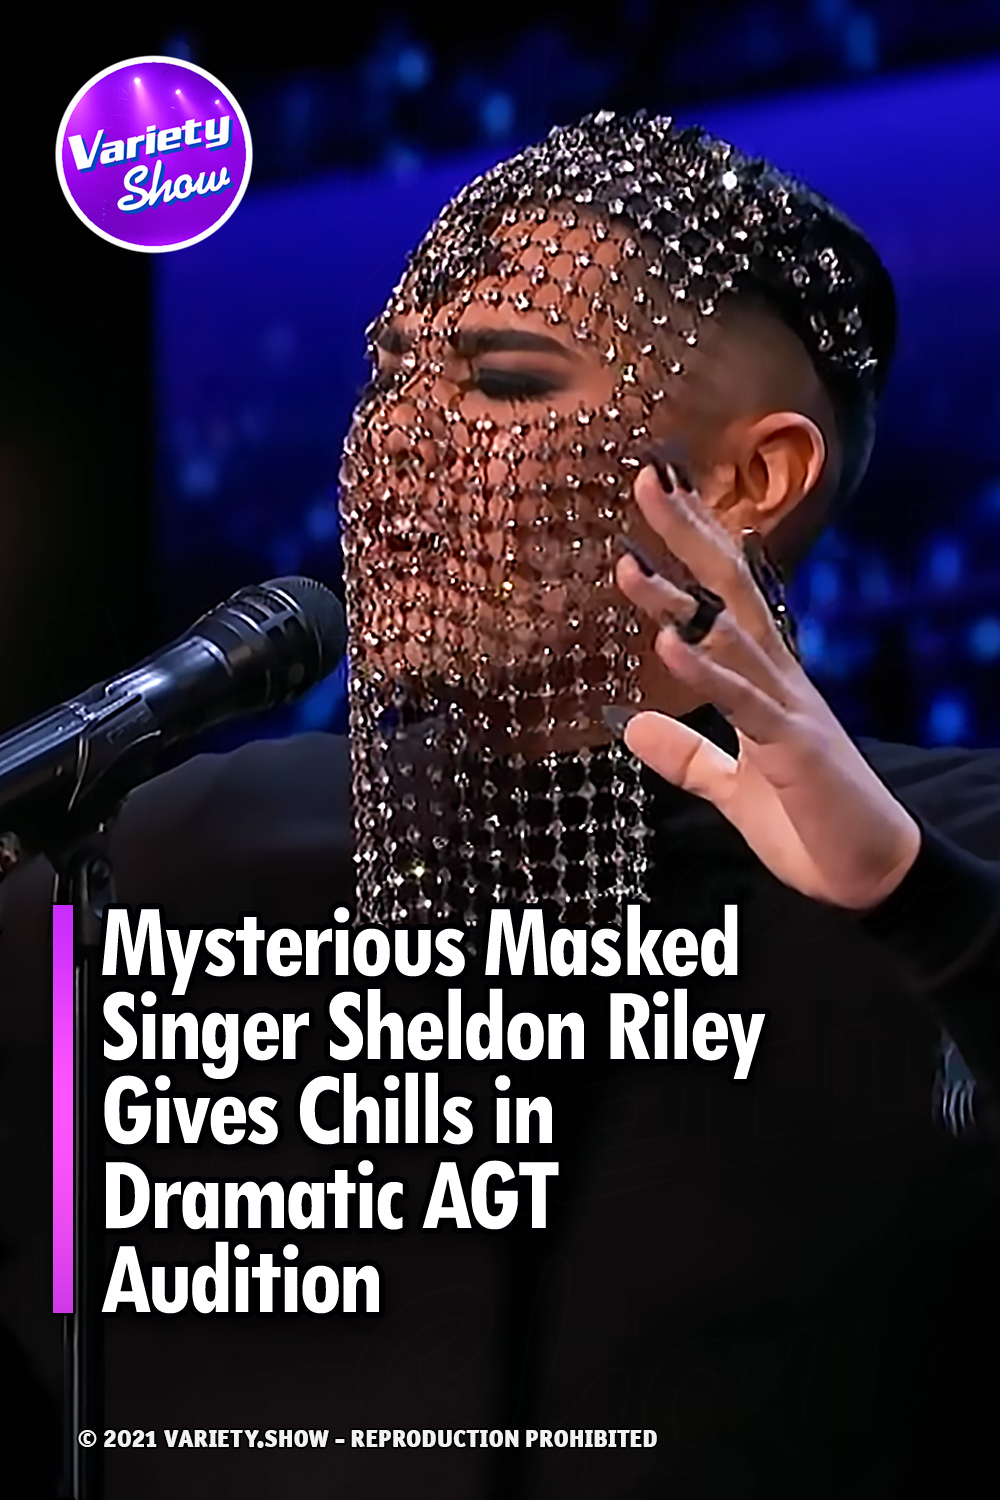 Mysterious Masked Singer Sheldon Riley Gives Chills in Dramatic AGT Audition